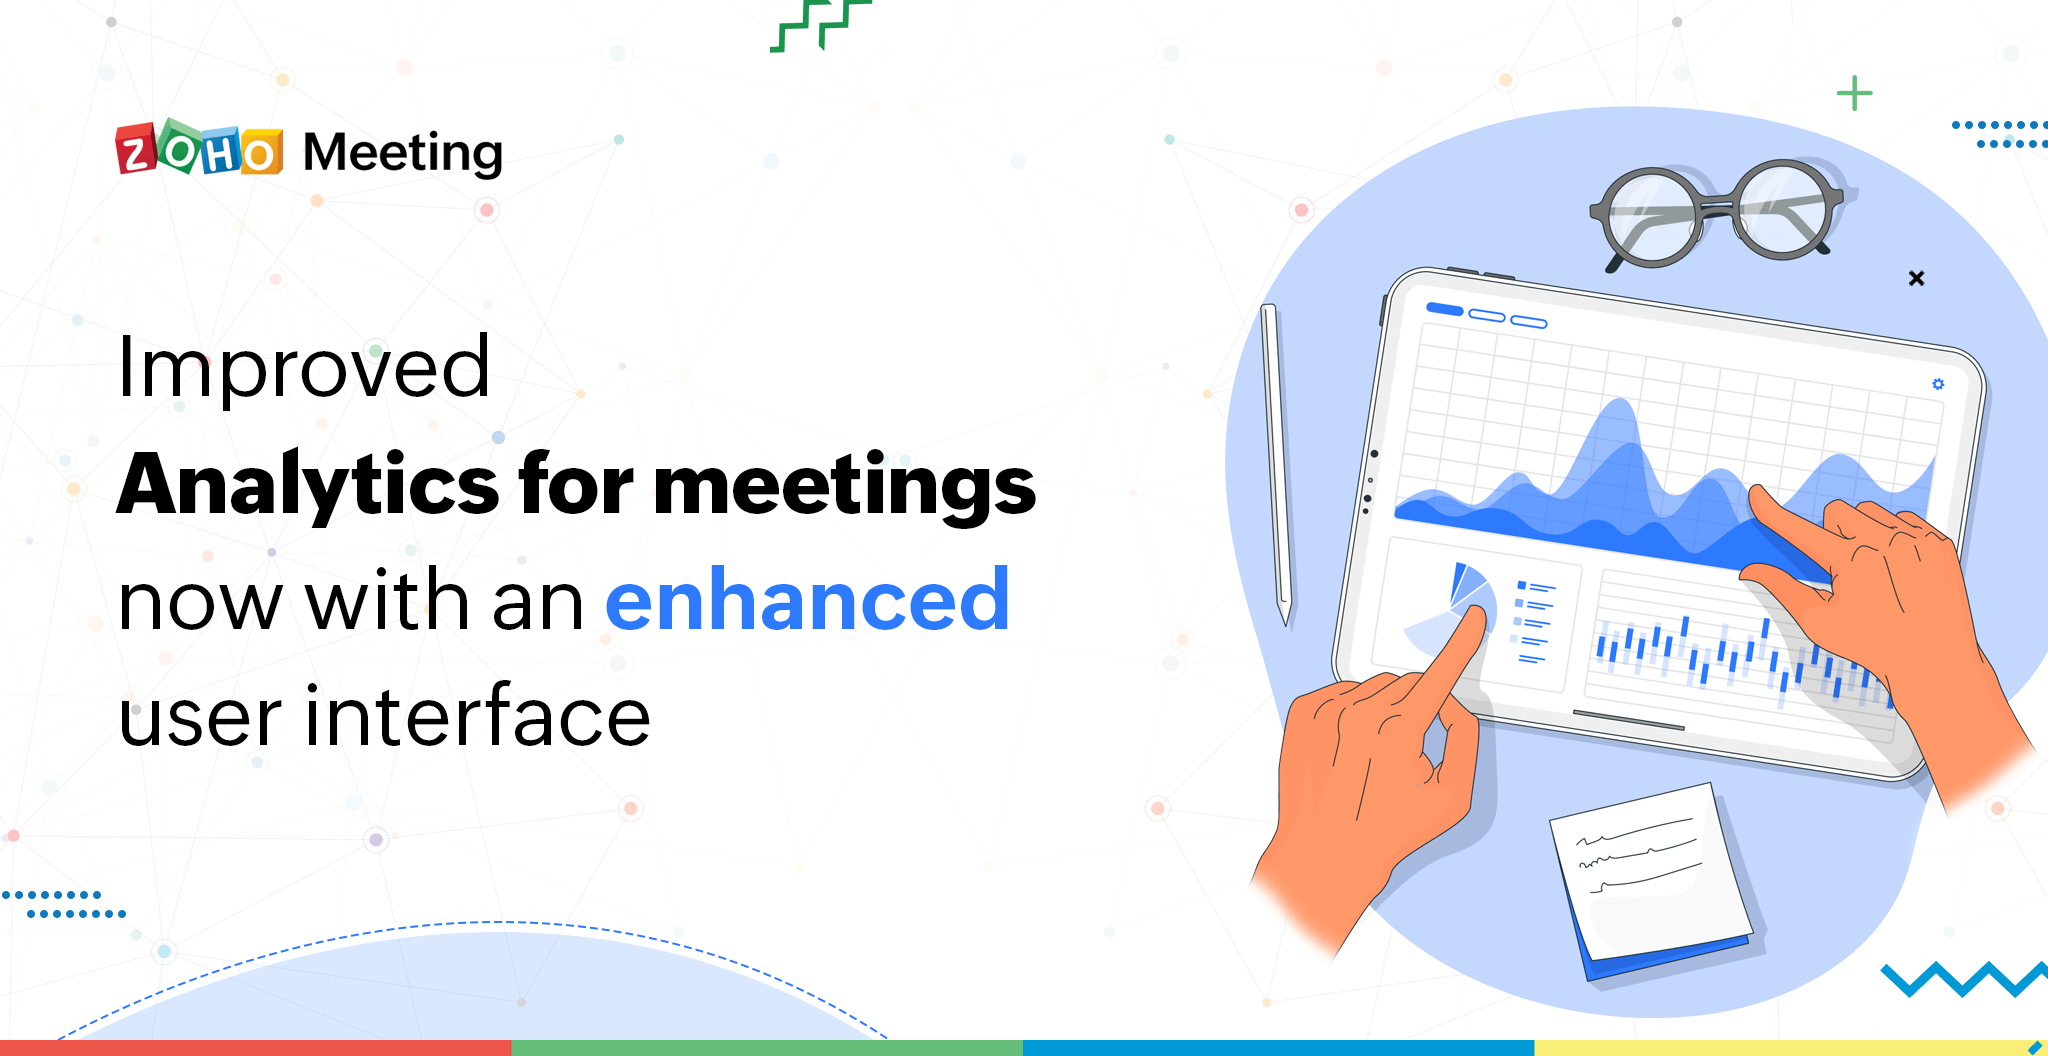 Announcing improved analytics for meetings—now with an enhanced user interface